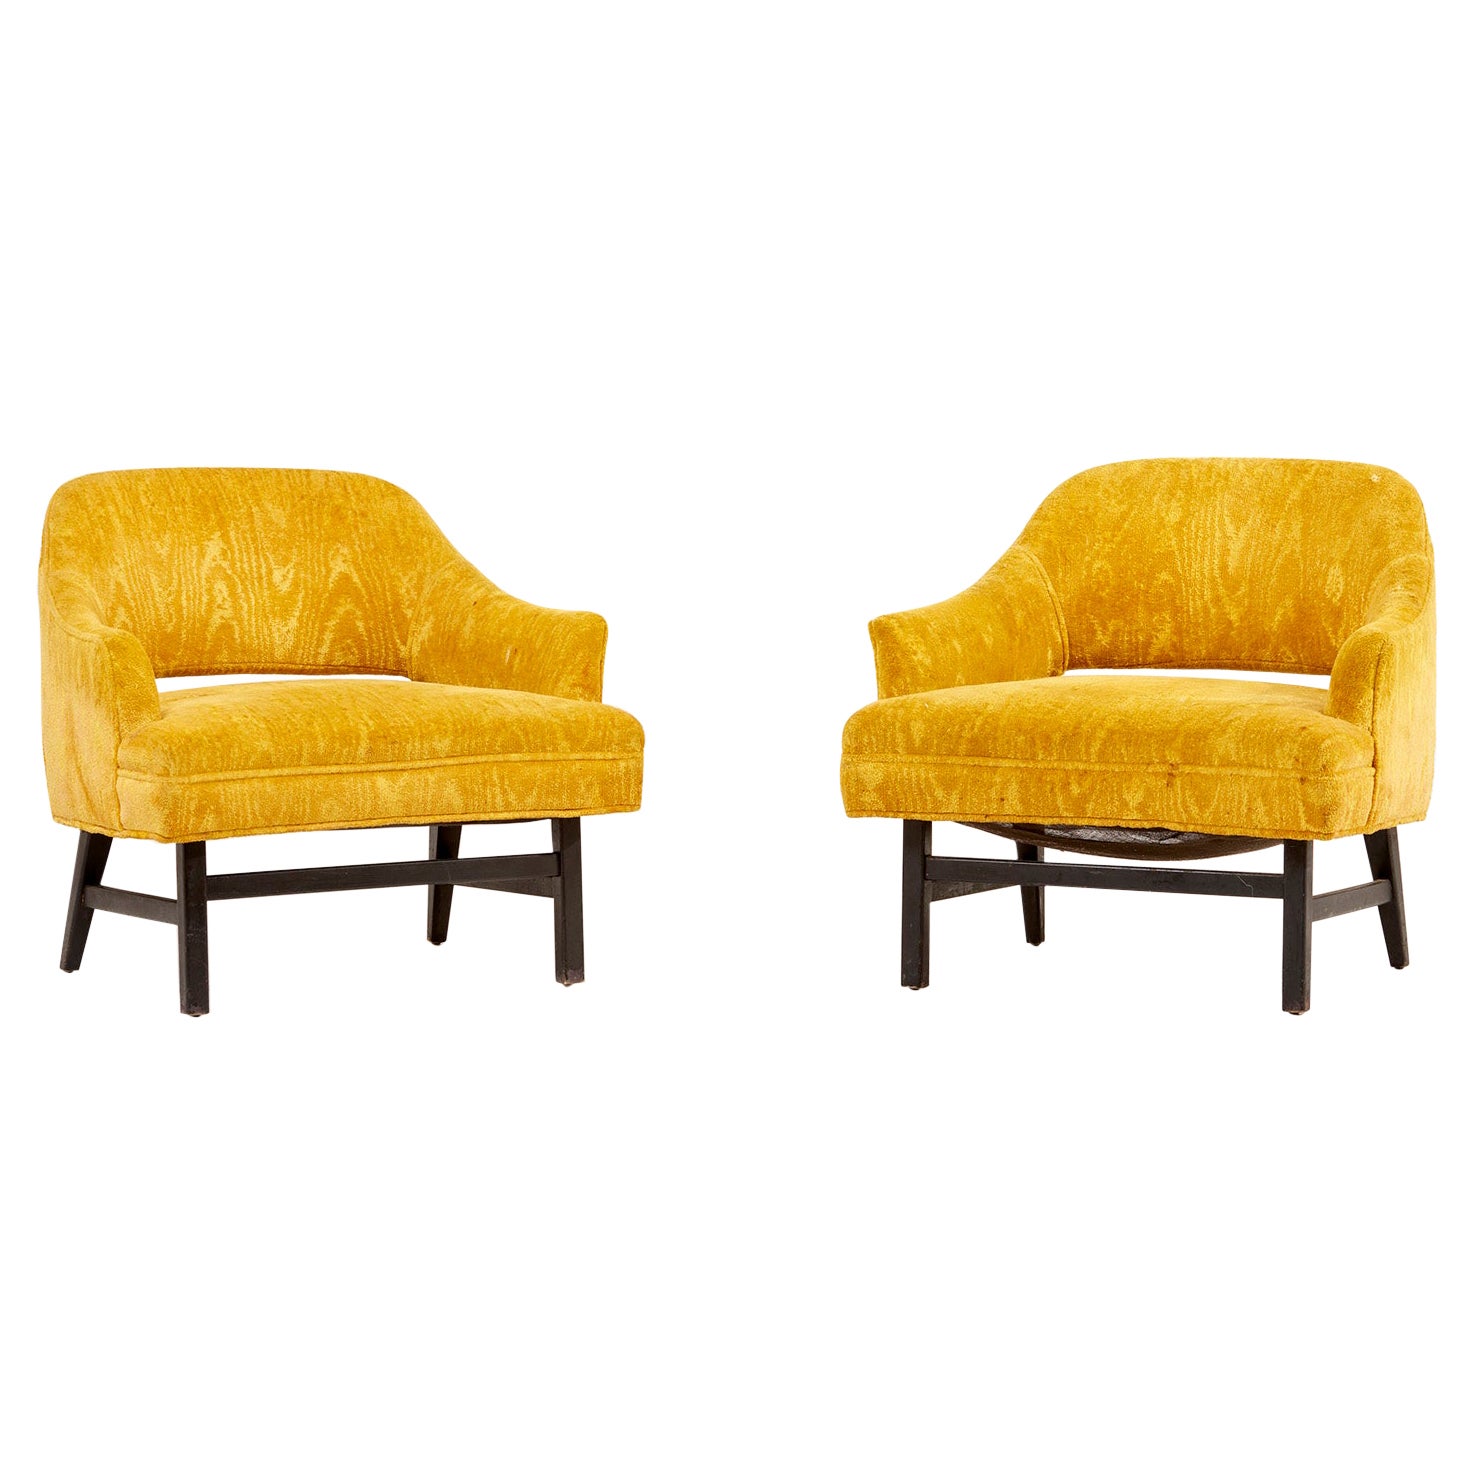 Pair of yellow Harvey Probber Lounge Chairs, USA 1960s